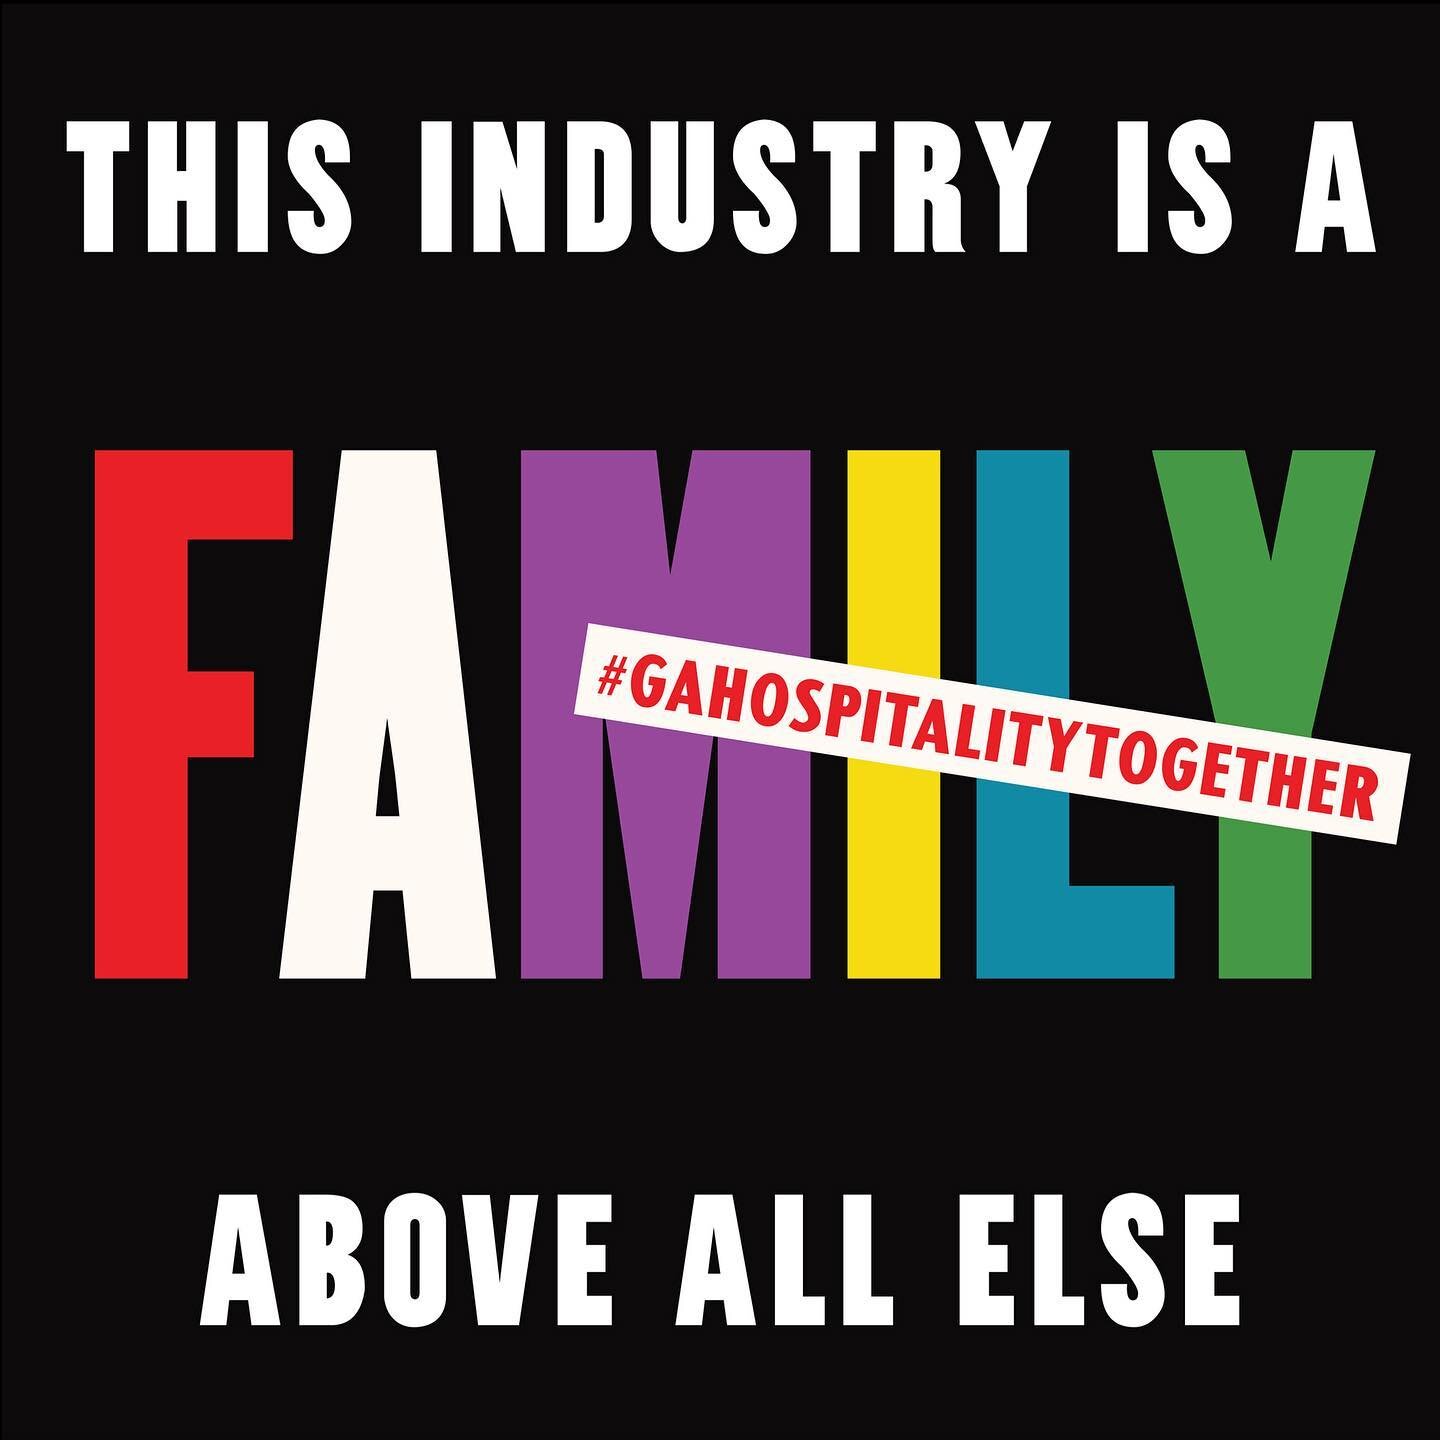 Independent restaurants are founded on a shared passion for nurturing through food and hospitality; this industry is a family above all else. Today we stand #GAHospitalityTogether so we can all re-emerge &mdash; with staying power &mdash; on the othe